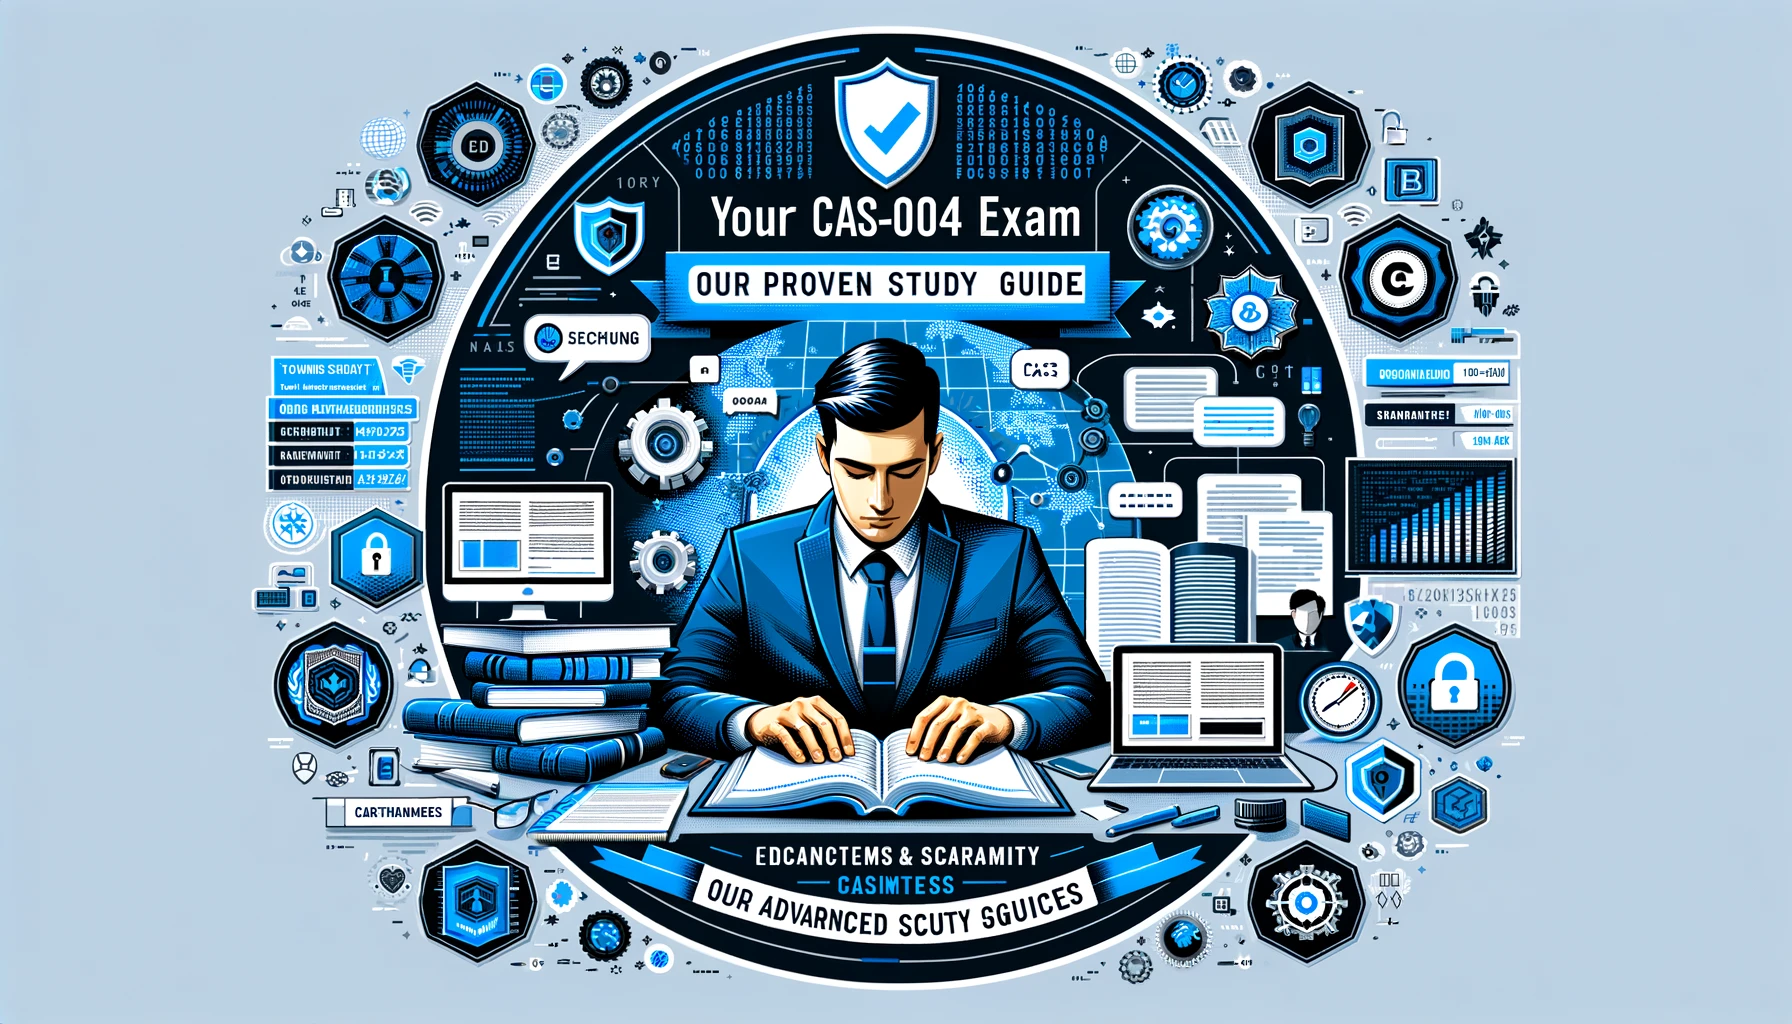 Your CAS-004 Exam: Our Proven Study Guide Guarantees Success